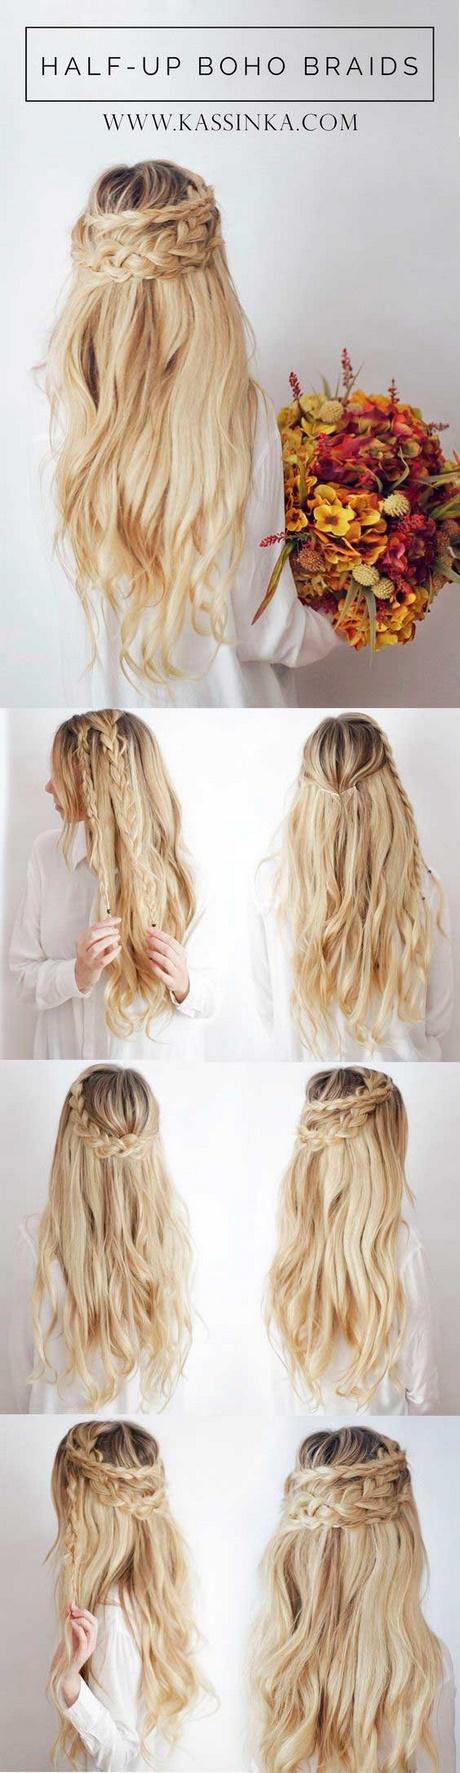 Hairstyles half up half down for prom hairstyles-half-up-half-down-for-prom-34_17